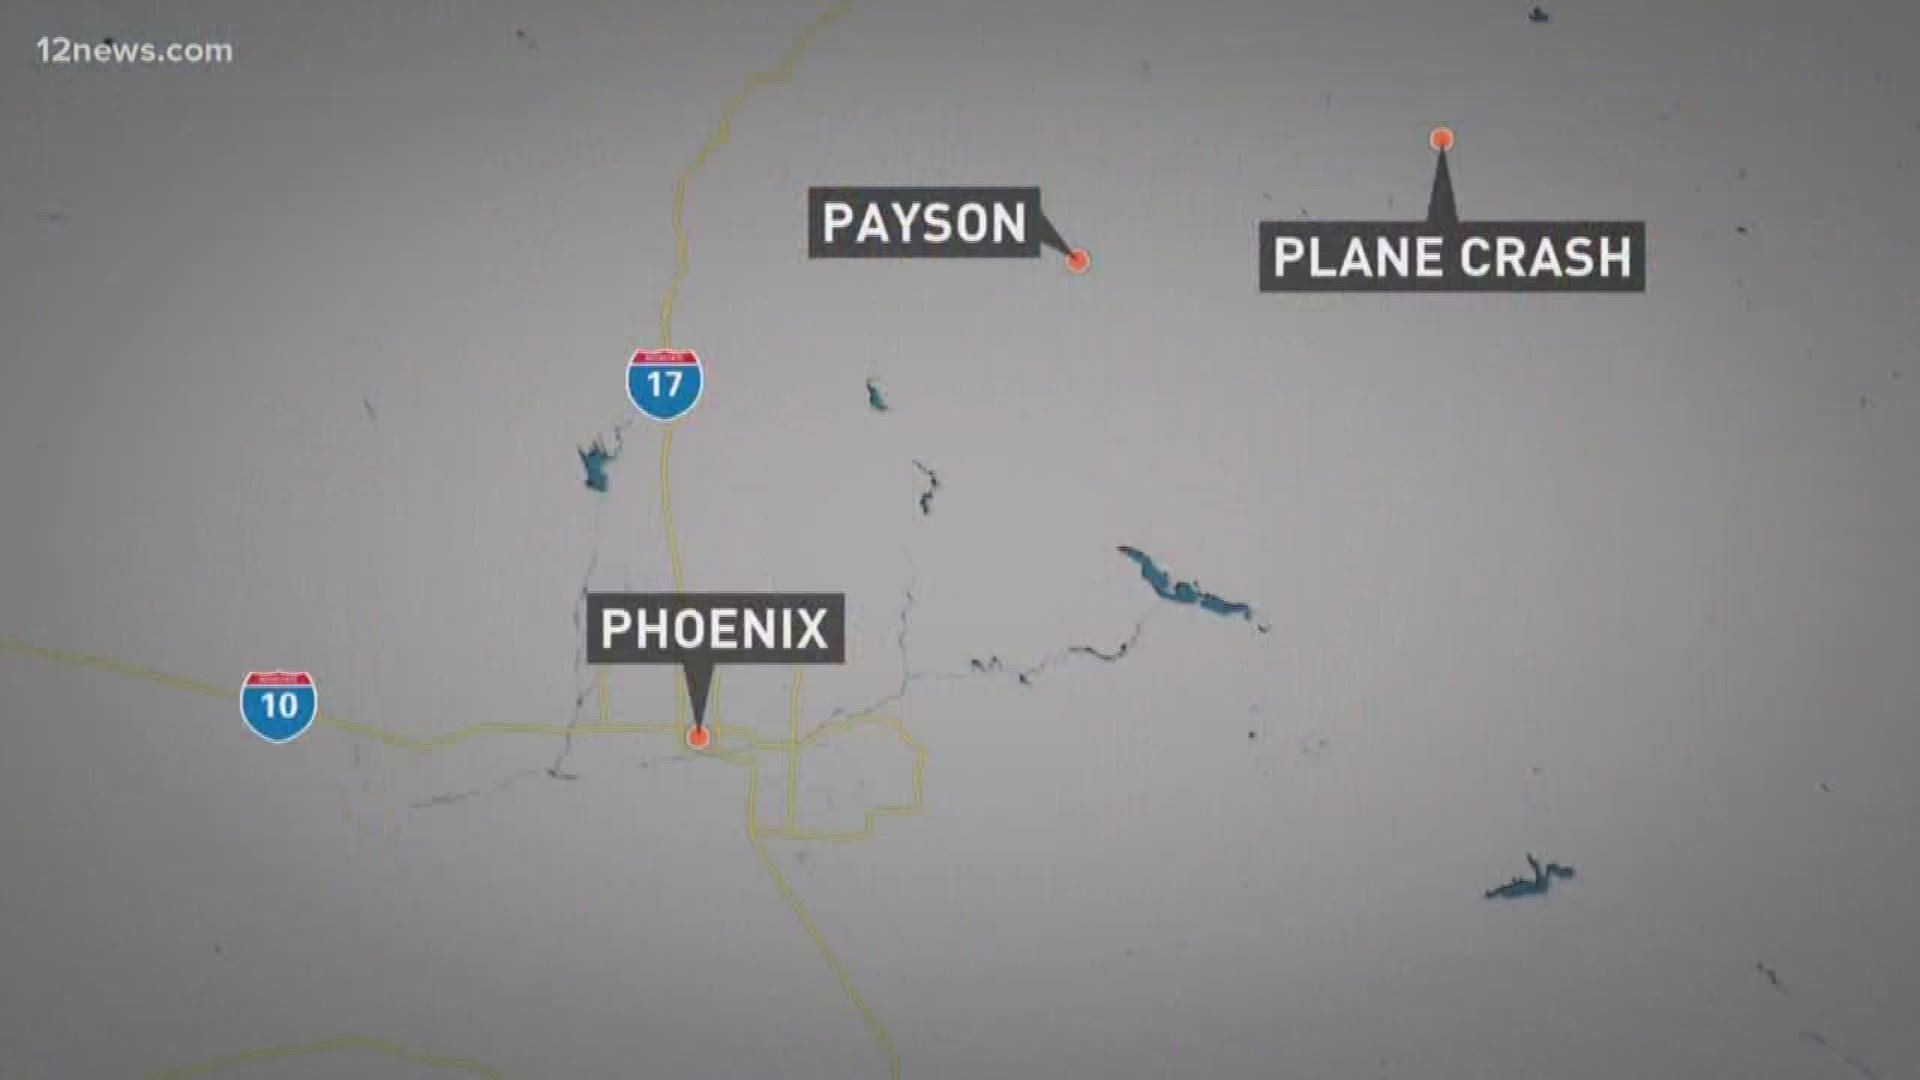 Two people were onboard a plane that crashed northeast of Payson. The plane went down near a private airstrip.